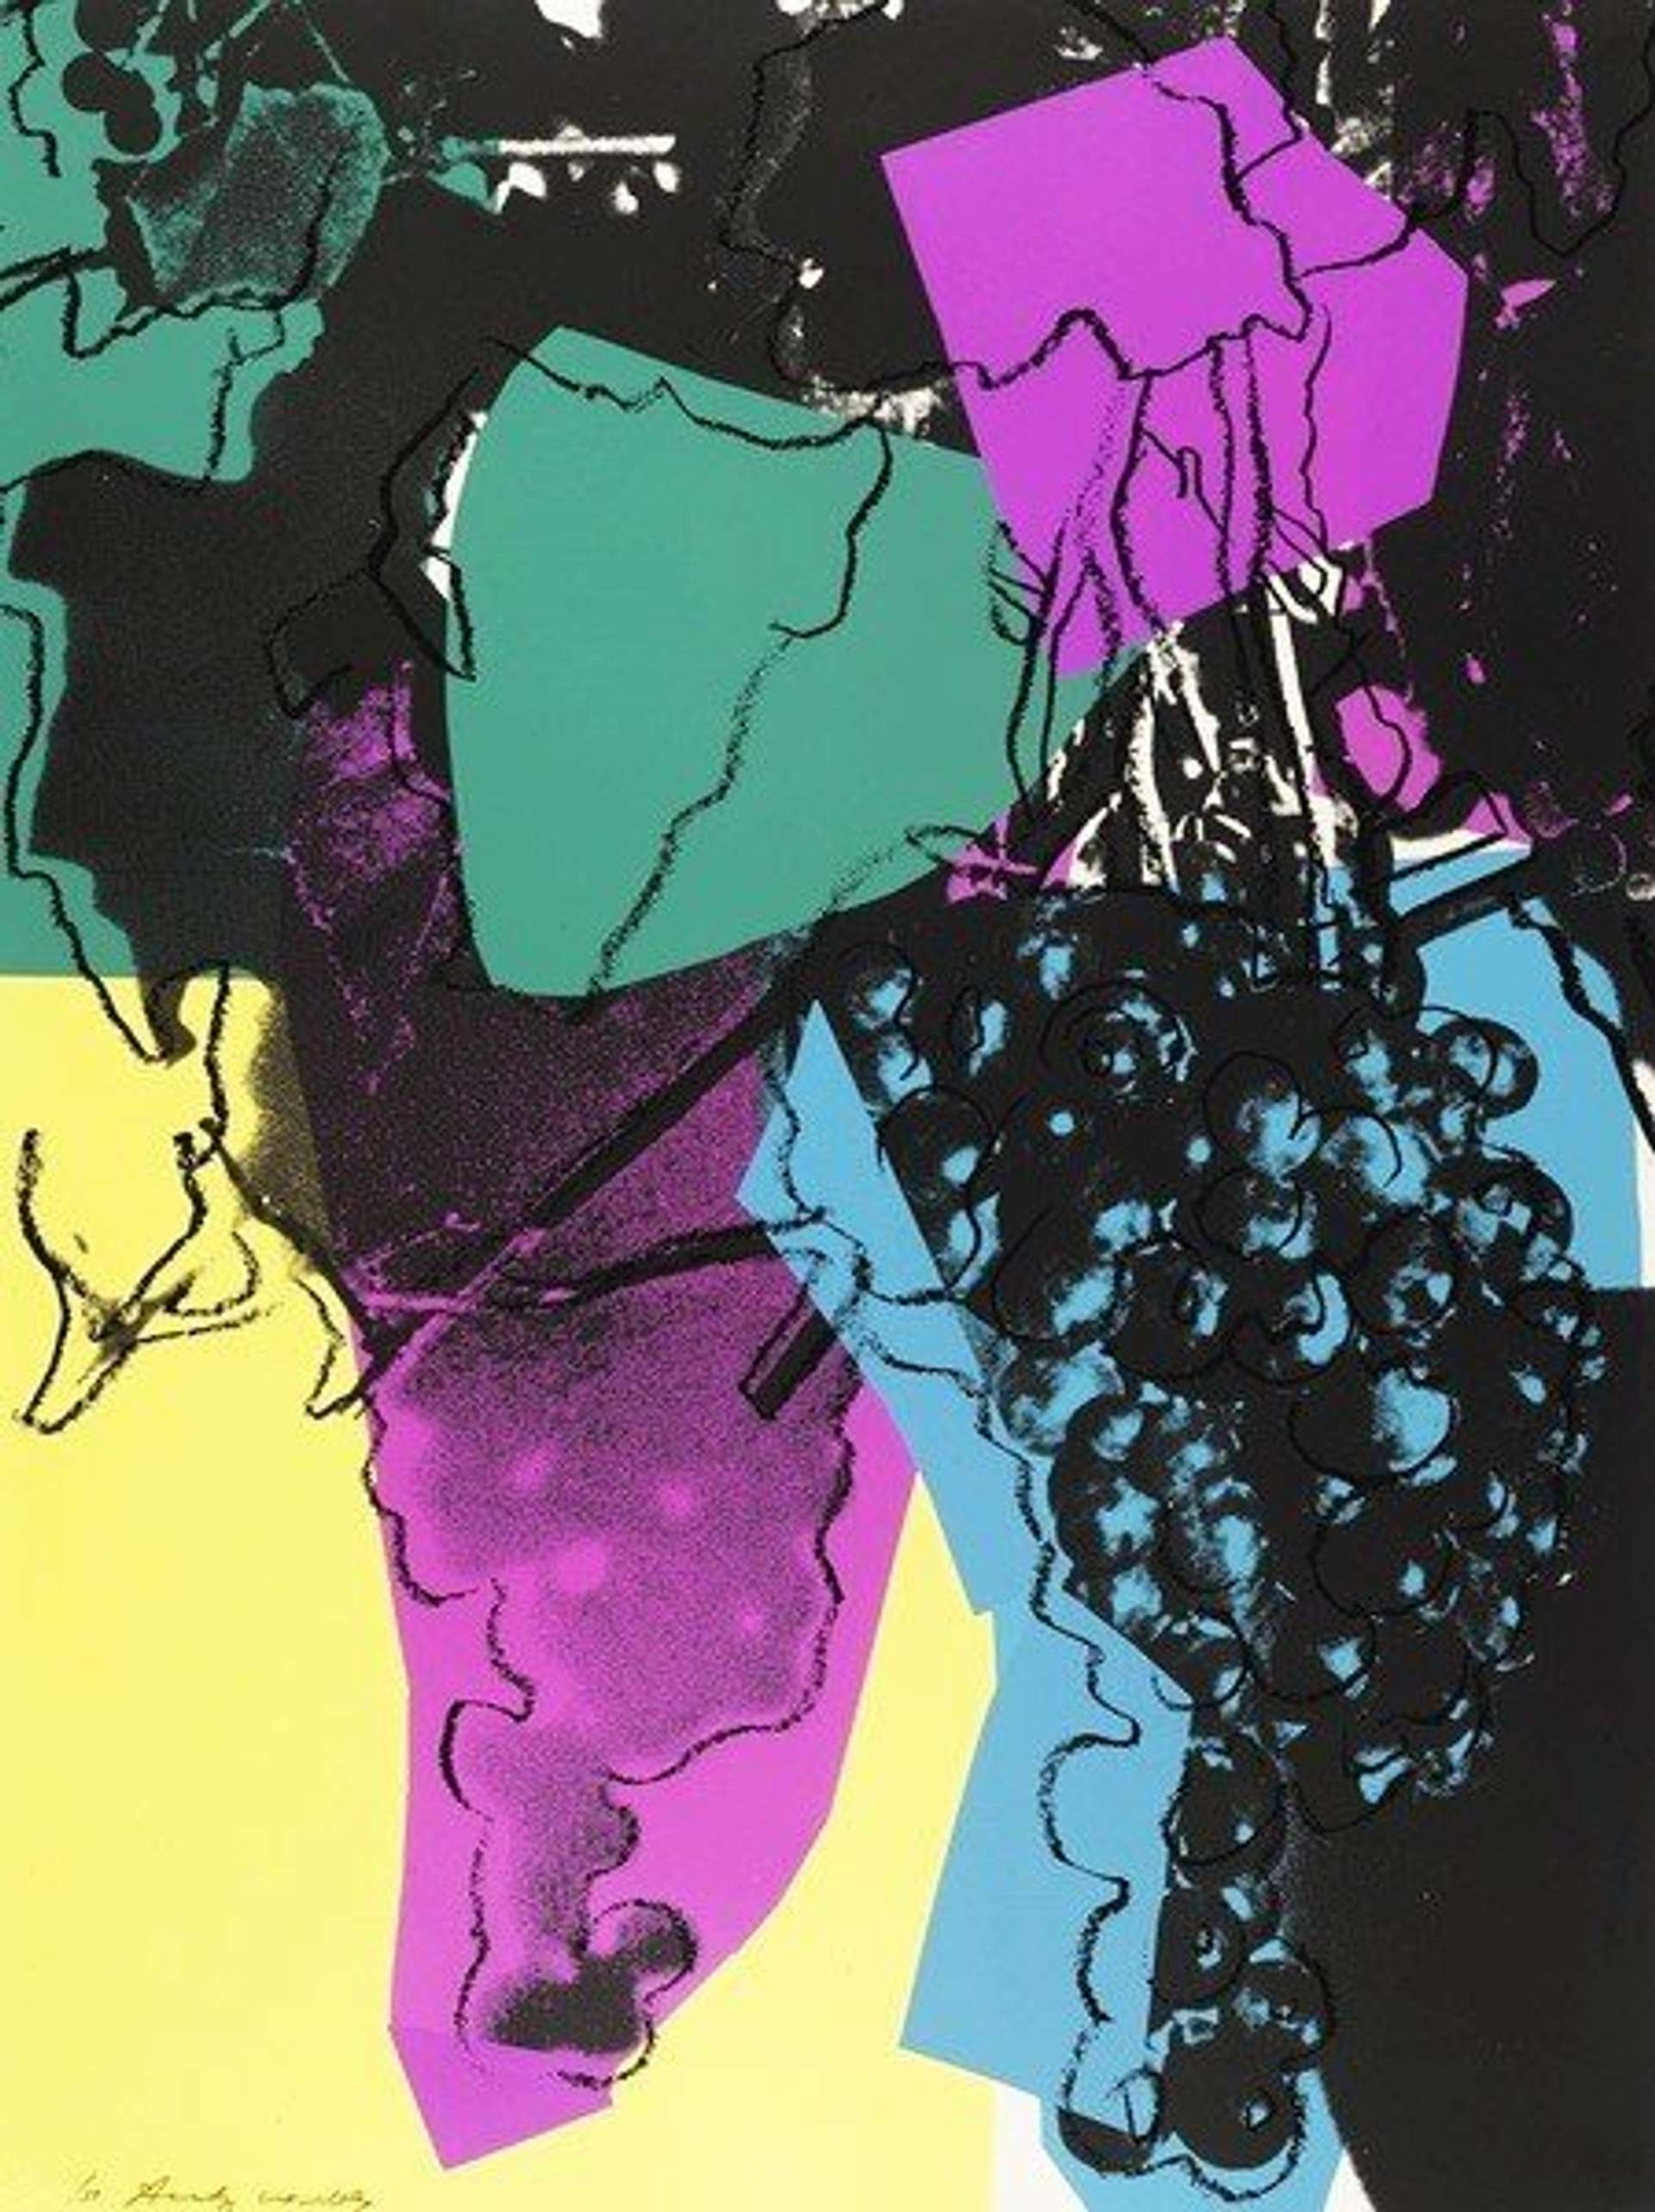 Grapes (F. & S. II.195) by Andy Warhol